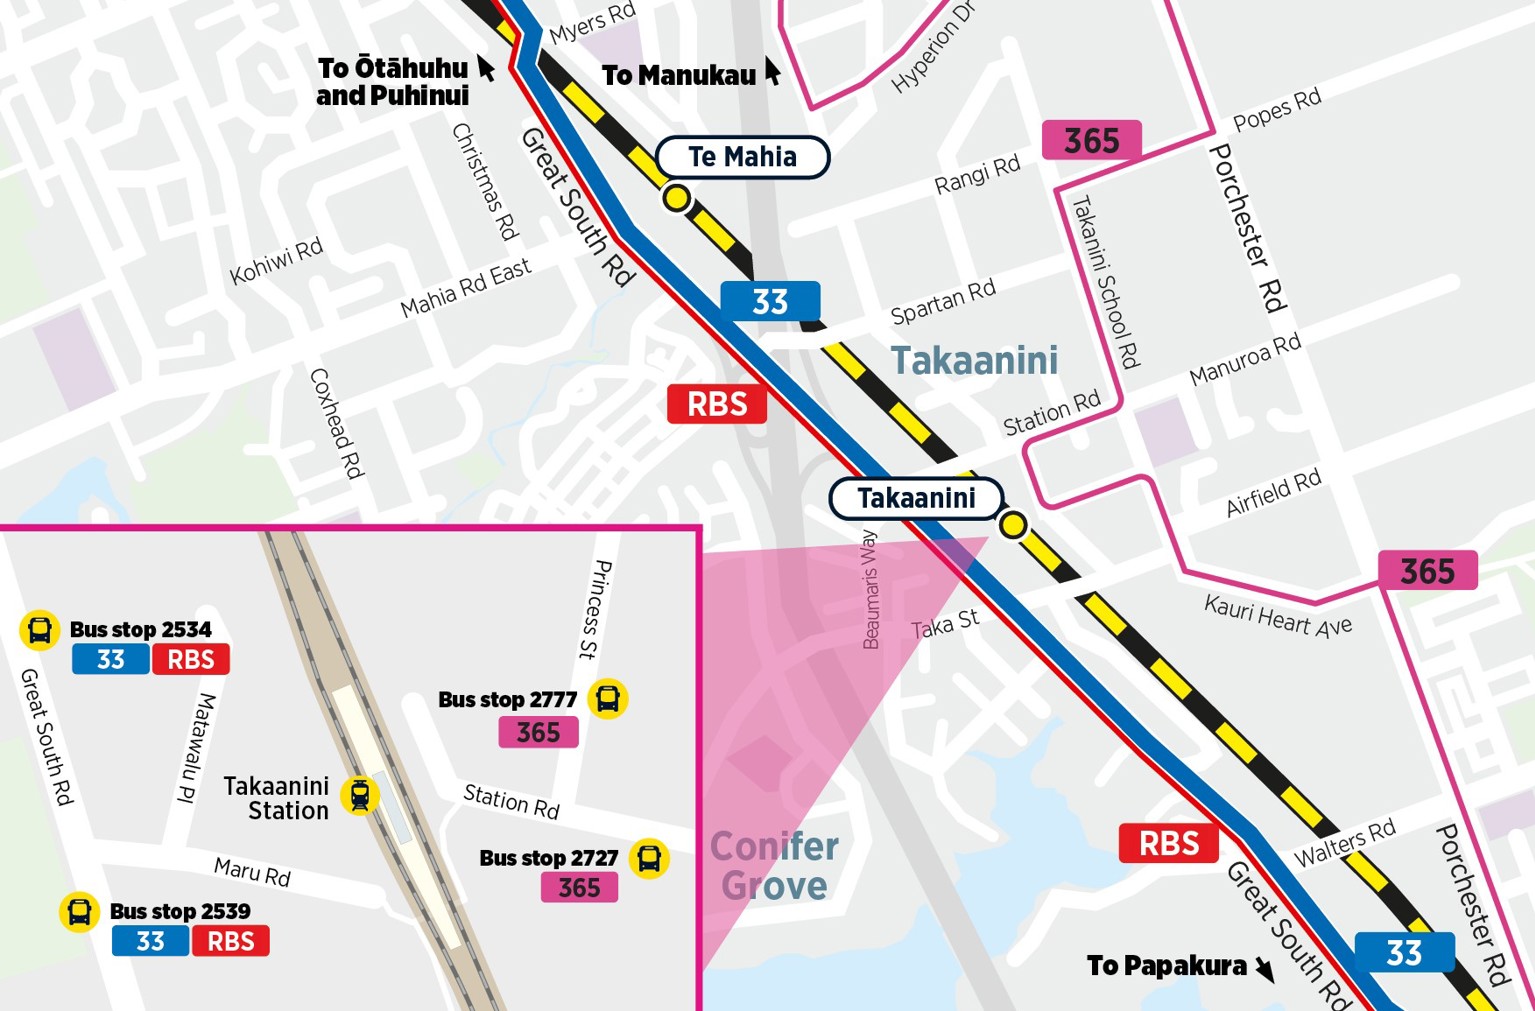 Map of alternative routes from Takaanini Station